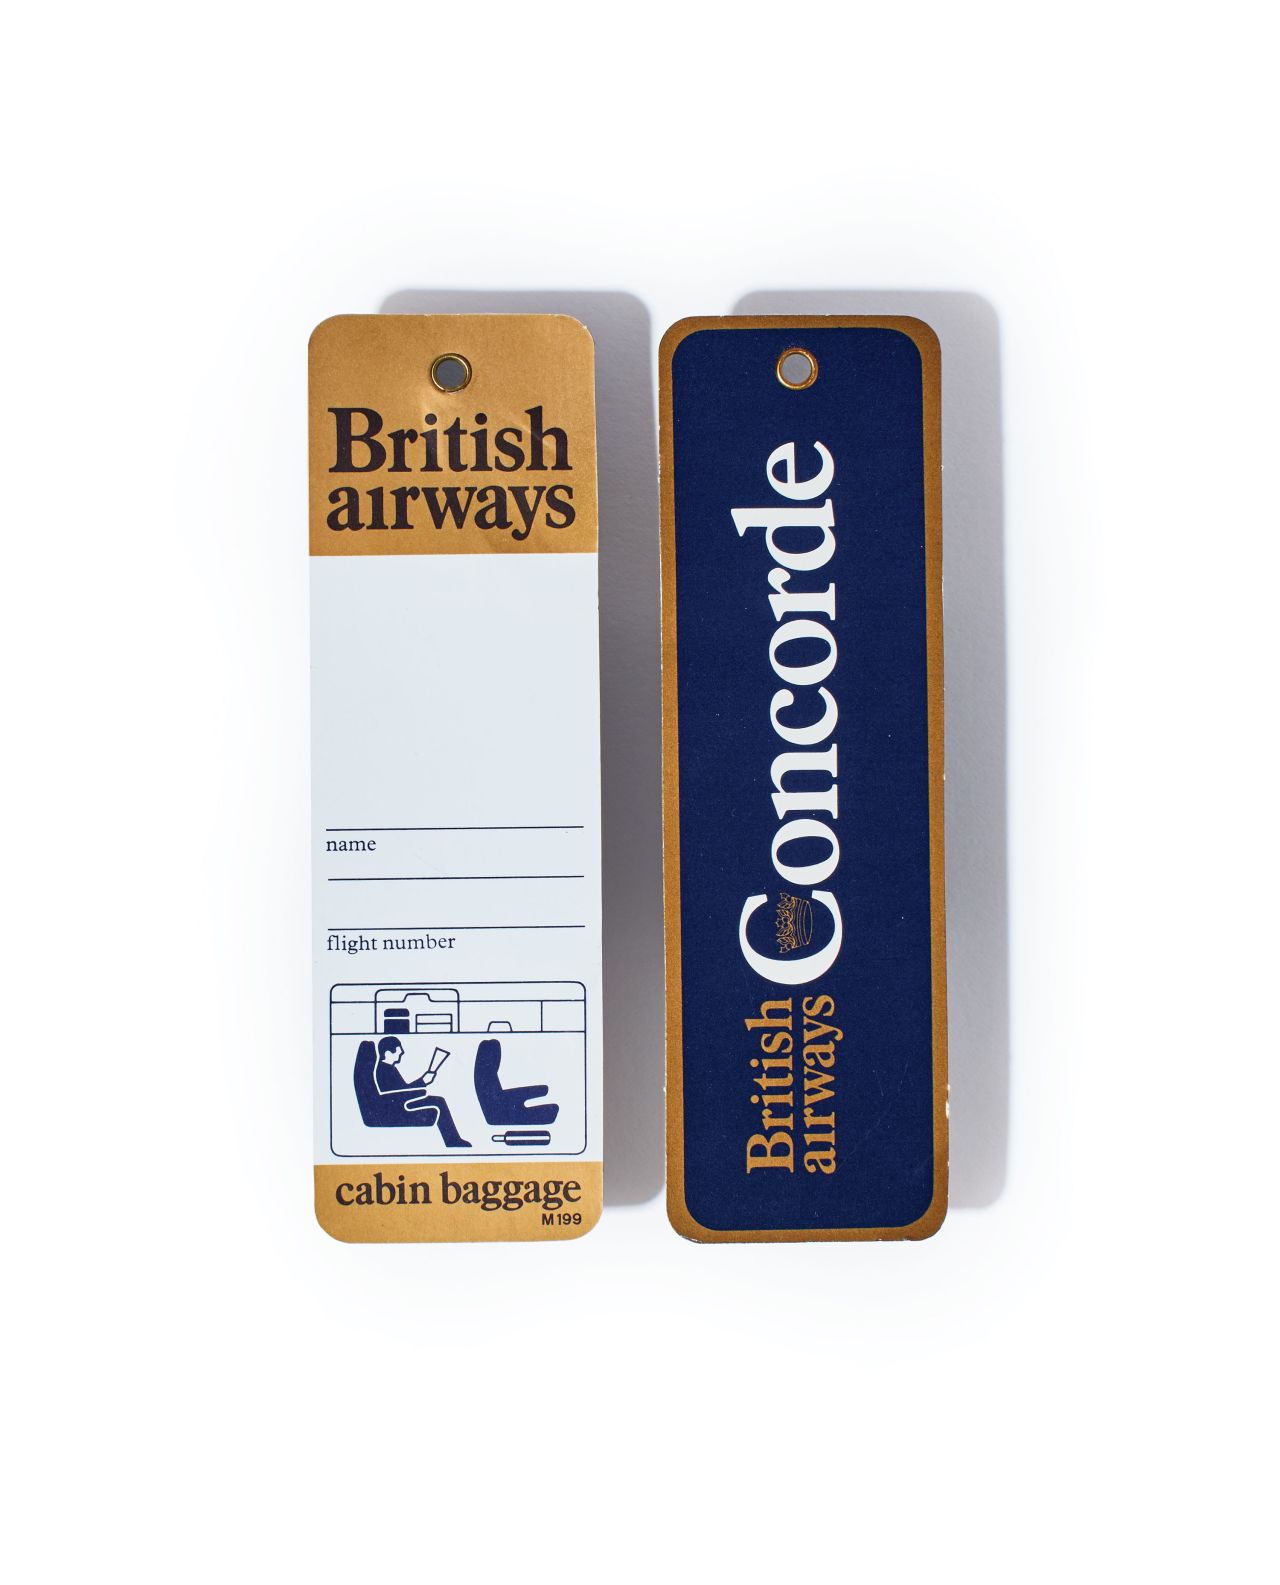 A British Airways Concorde luggage tag from the 1970s.